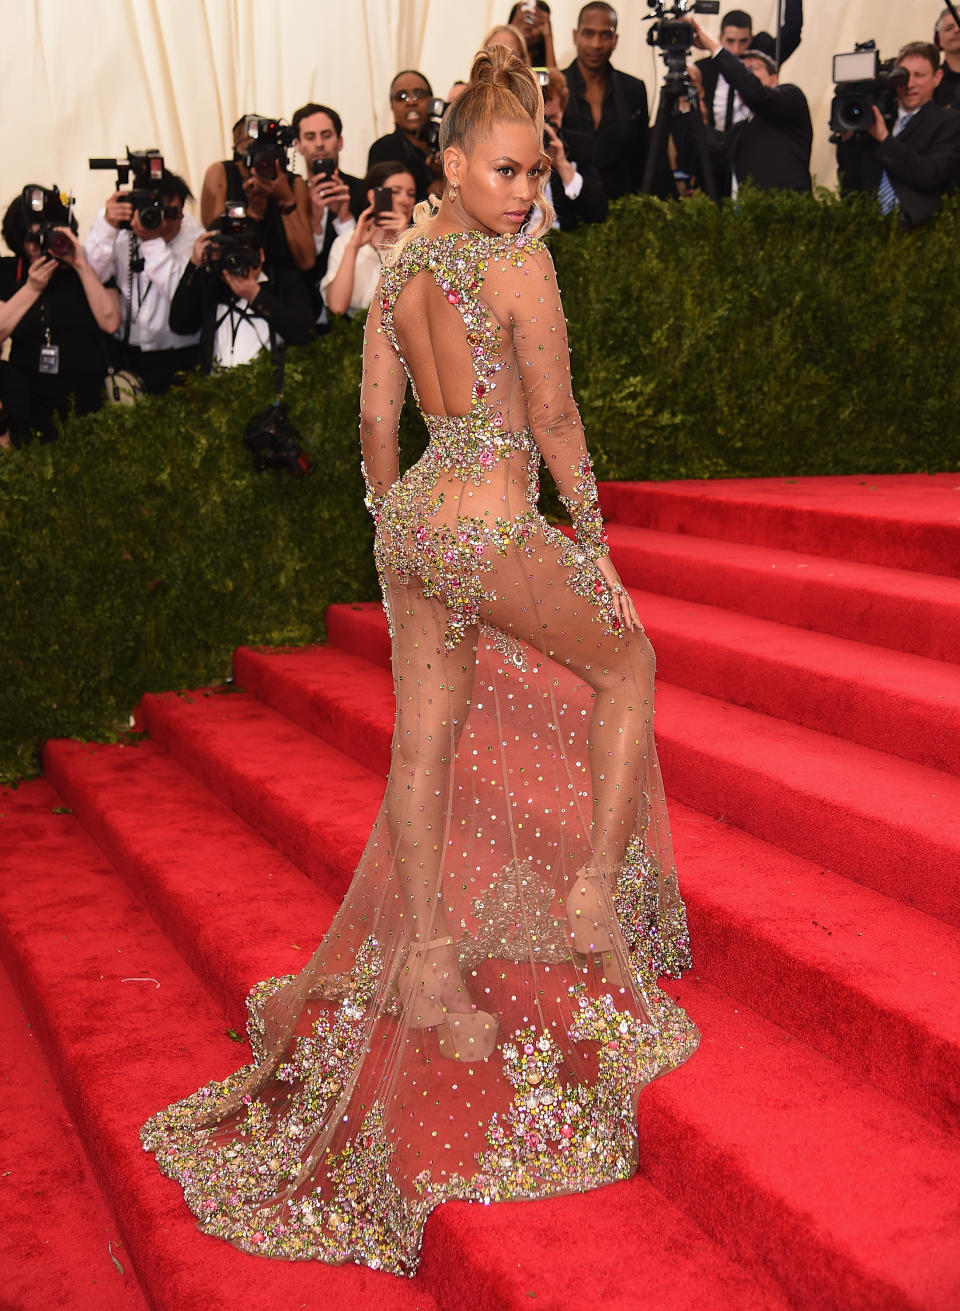 givenchy, sheer dresses trend, see-through style outfit fashion trends, NEW YORK, NY - MAY 04:  Beyonce attends the 'China: Through The Looking Glass' Costume Institute Benefit Gala at the Metropolitan Museum of Art on May 4, 2015 in New York City.  (Photo by Dimitrios Kambouris/Getty Images)